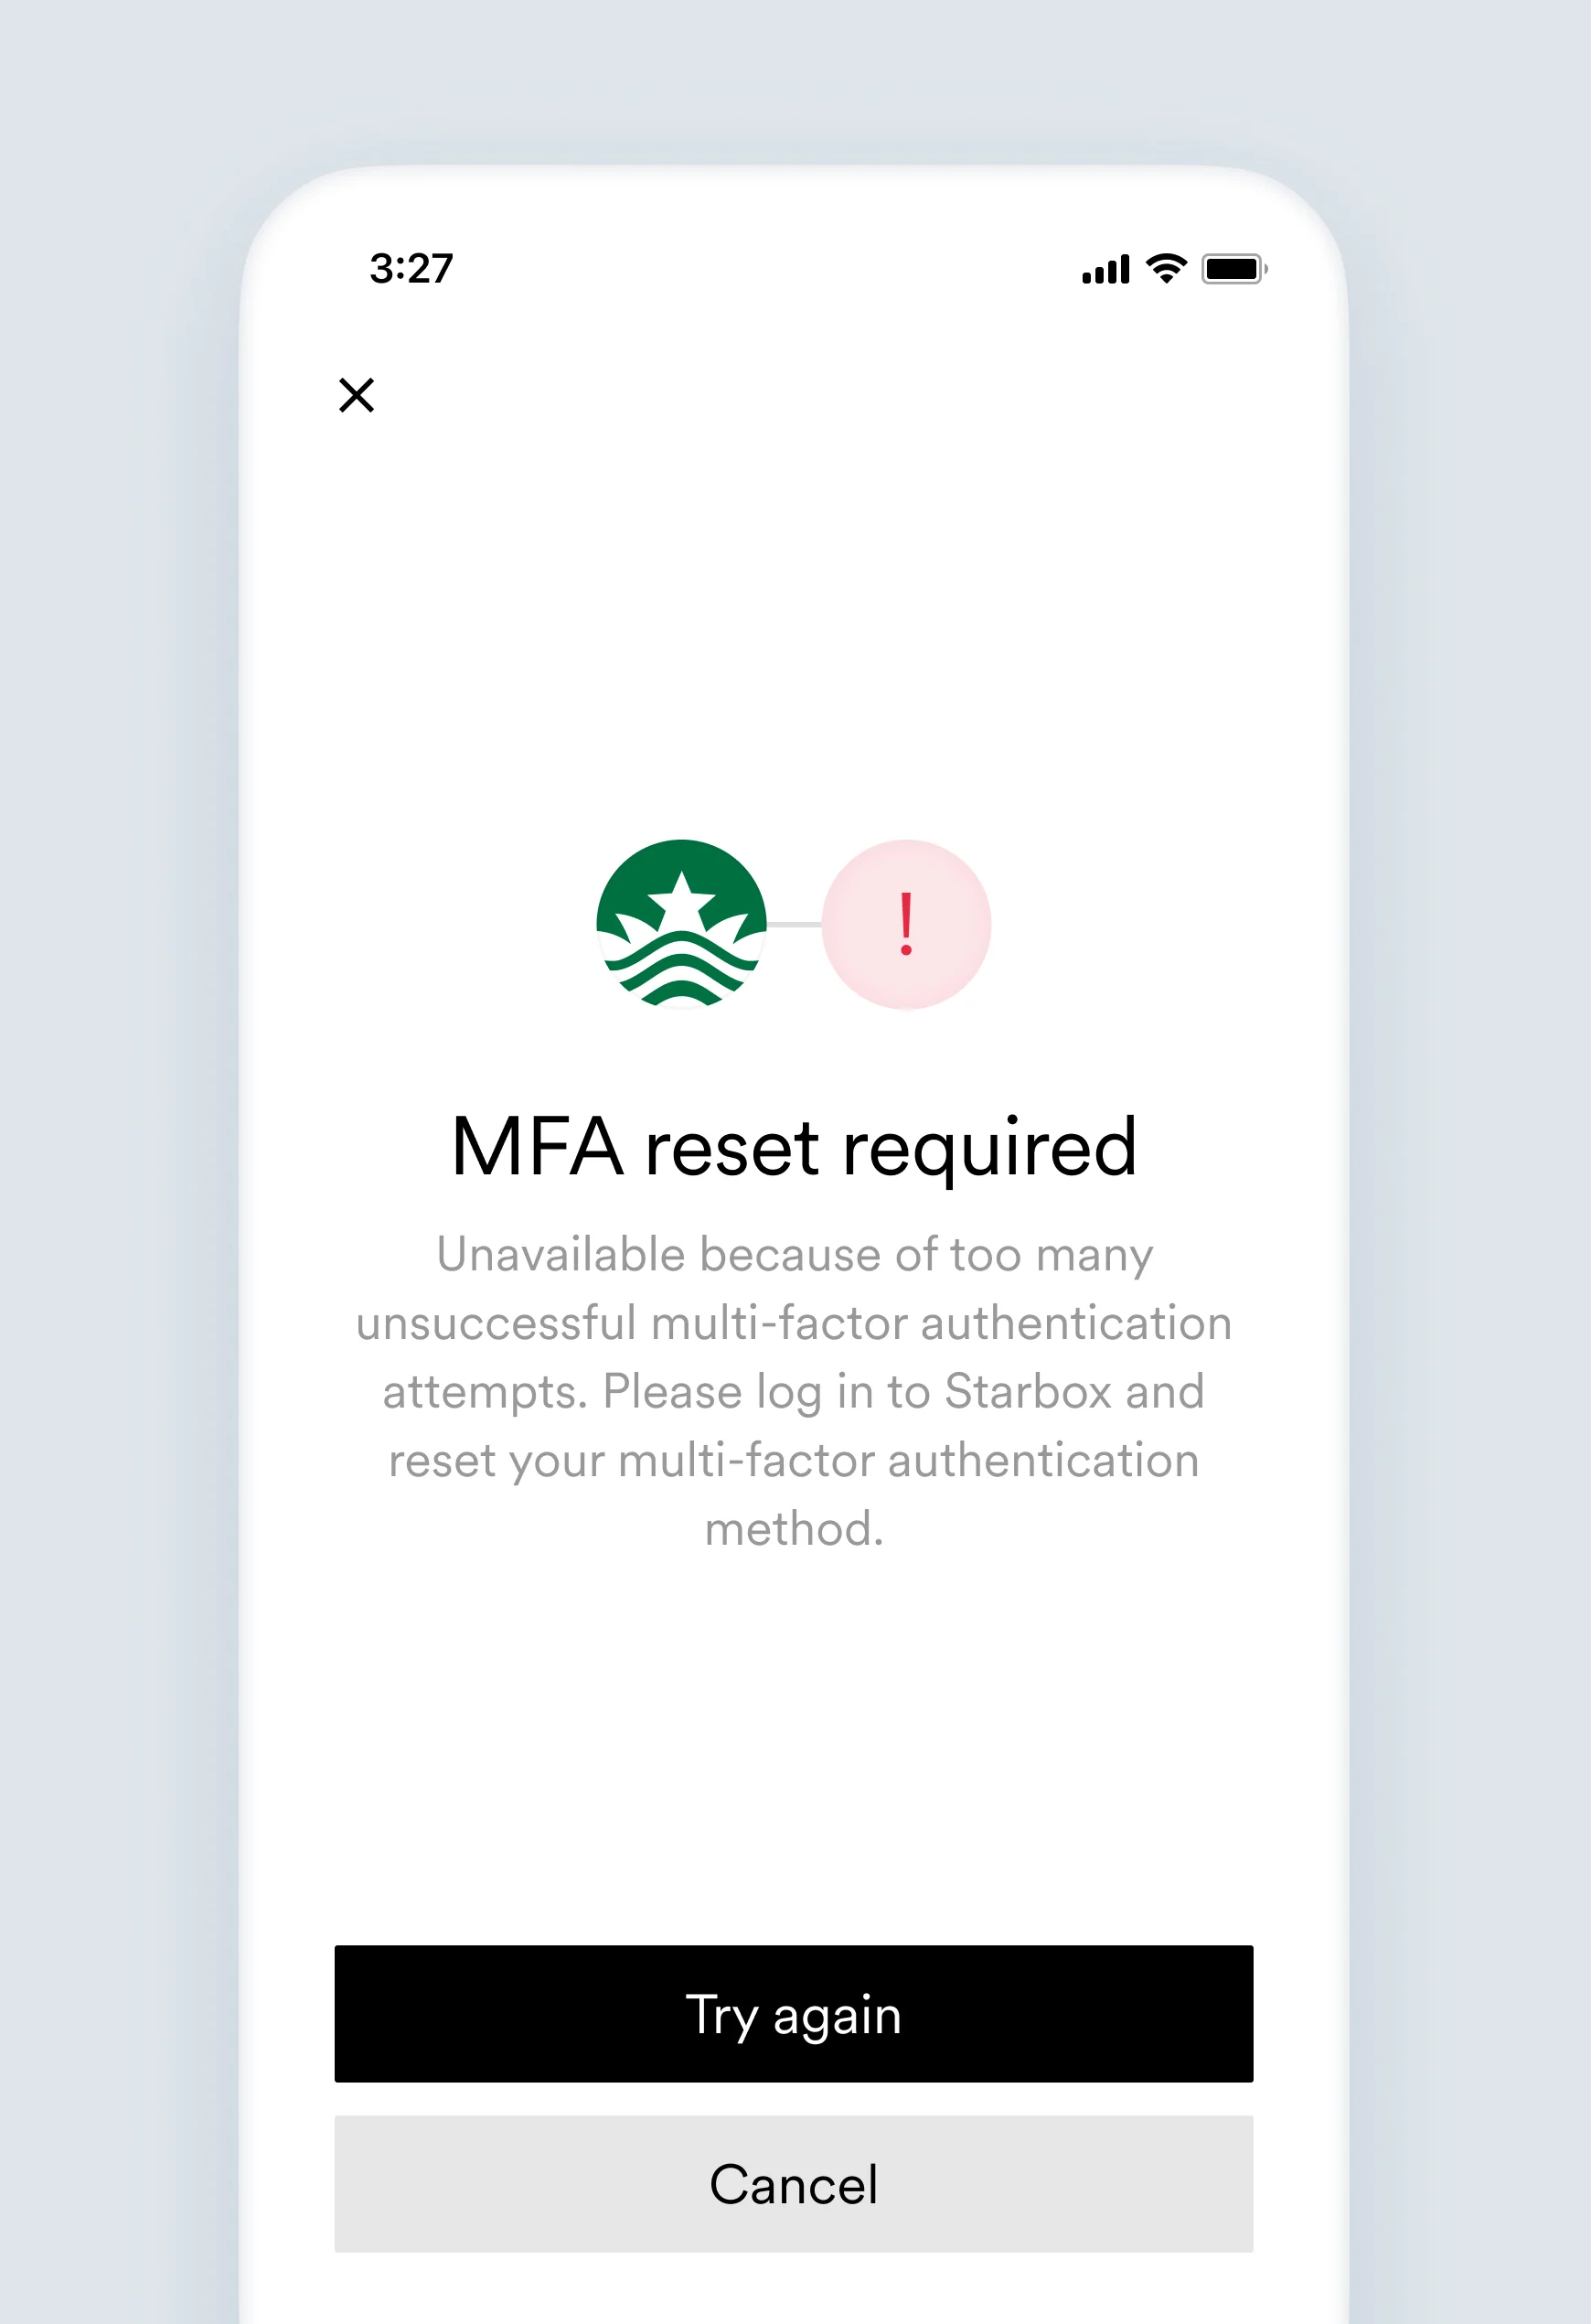 The mfa_attempts_exceeded account connection error screen.